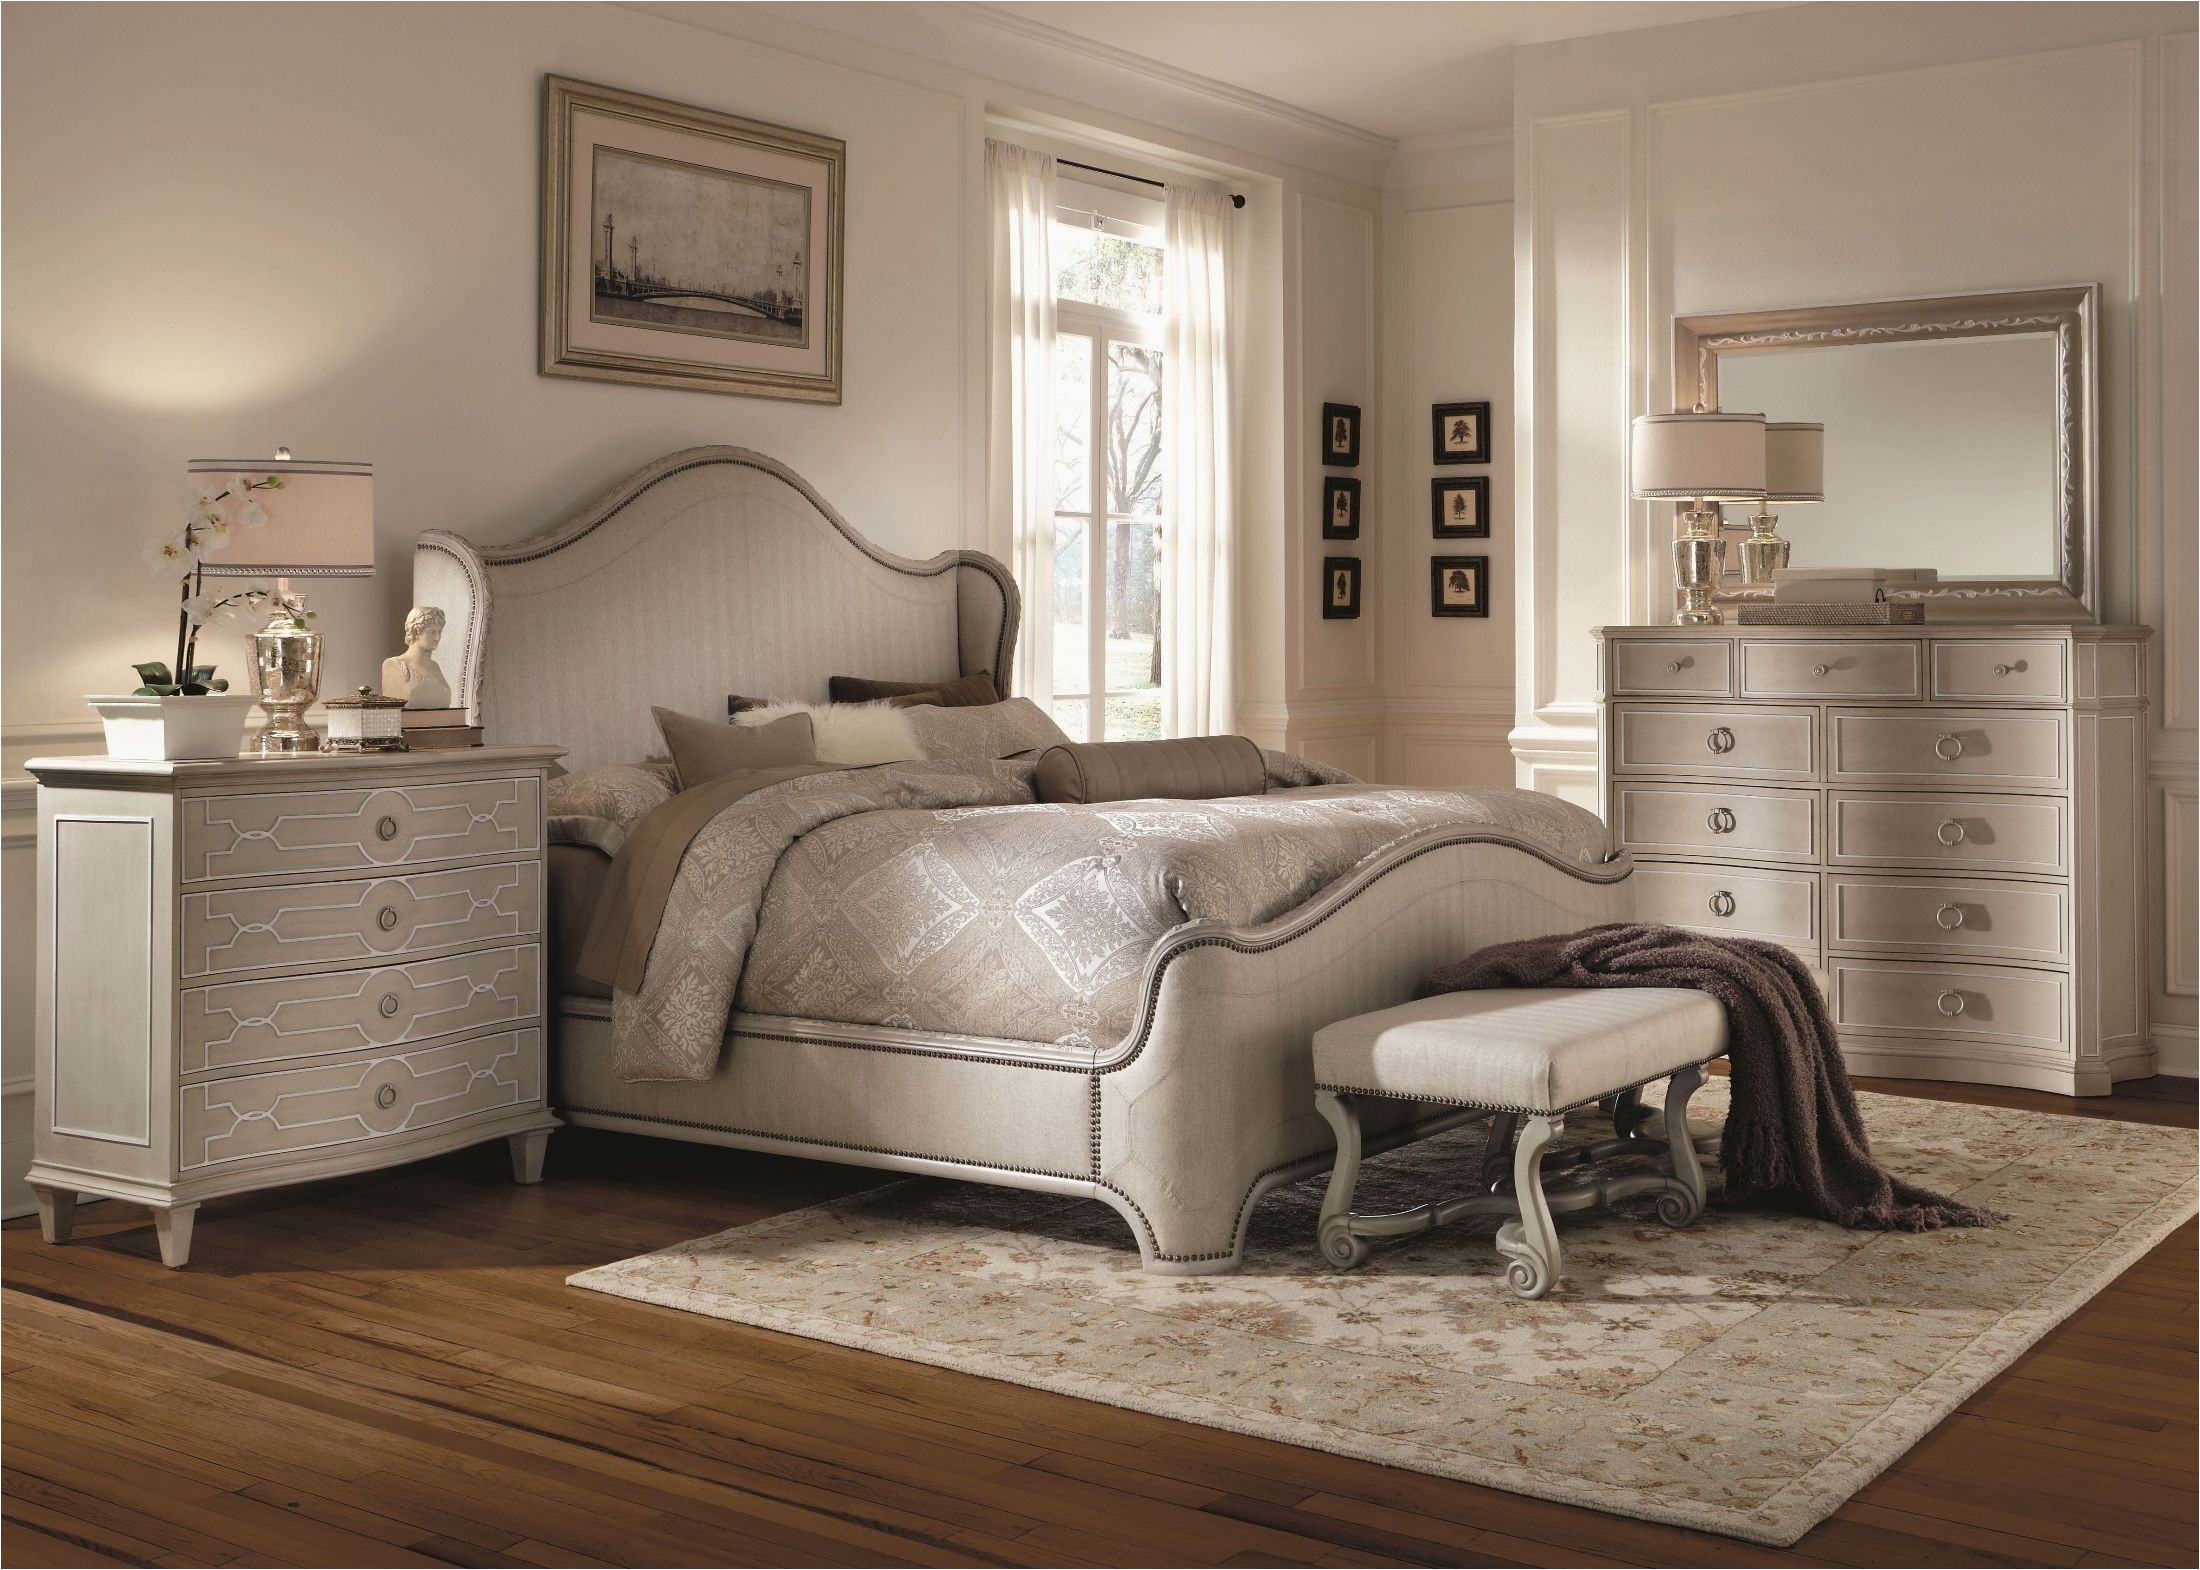 ashley furniture bedroom benches inspirational chateaux grey upholstered shelter bedroom set from art bedroom stock of